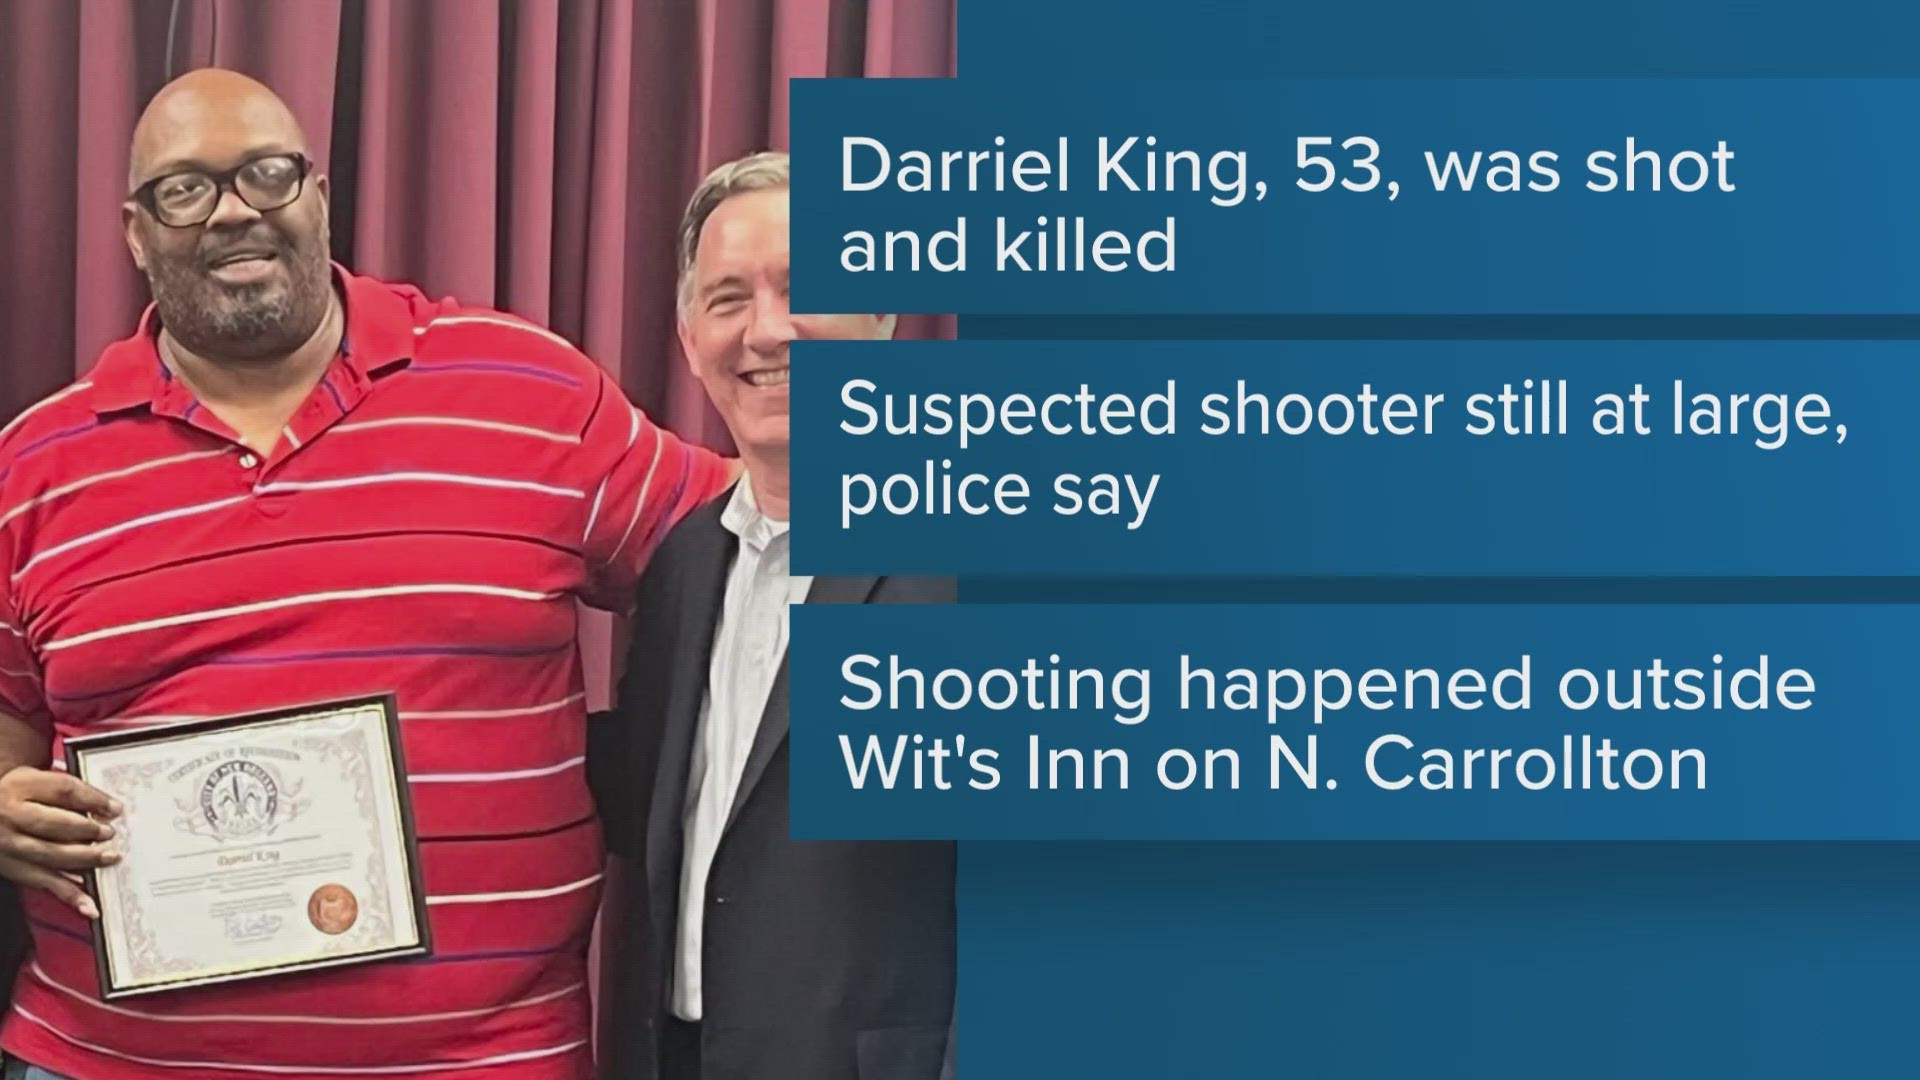 The deadly shooting happened shortly after 11 outside the Wit's Inn. NOPD said on Monday that the suspect was still at large.